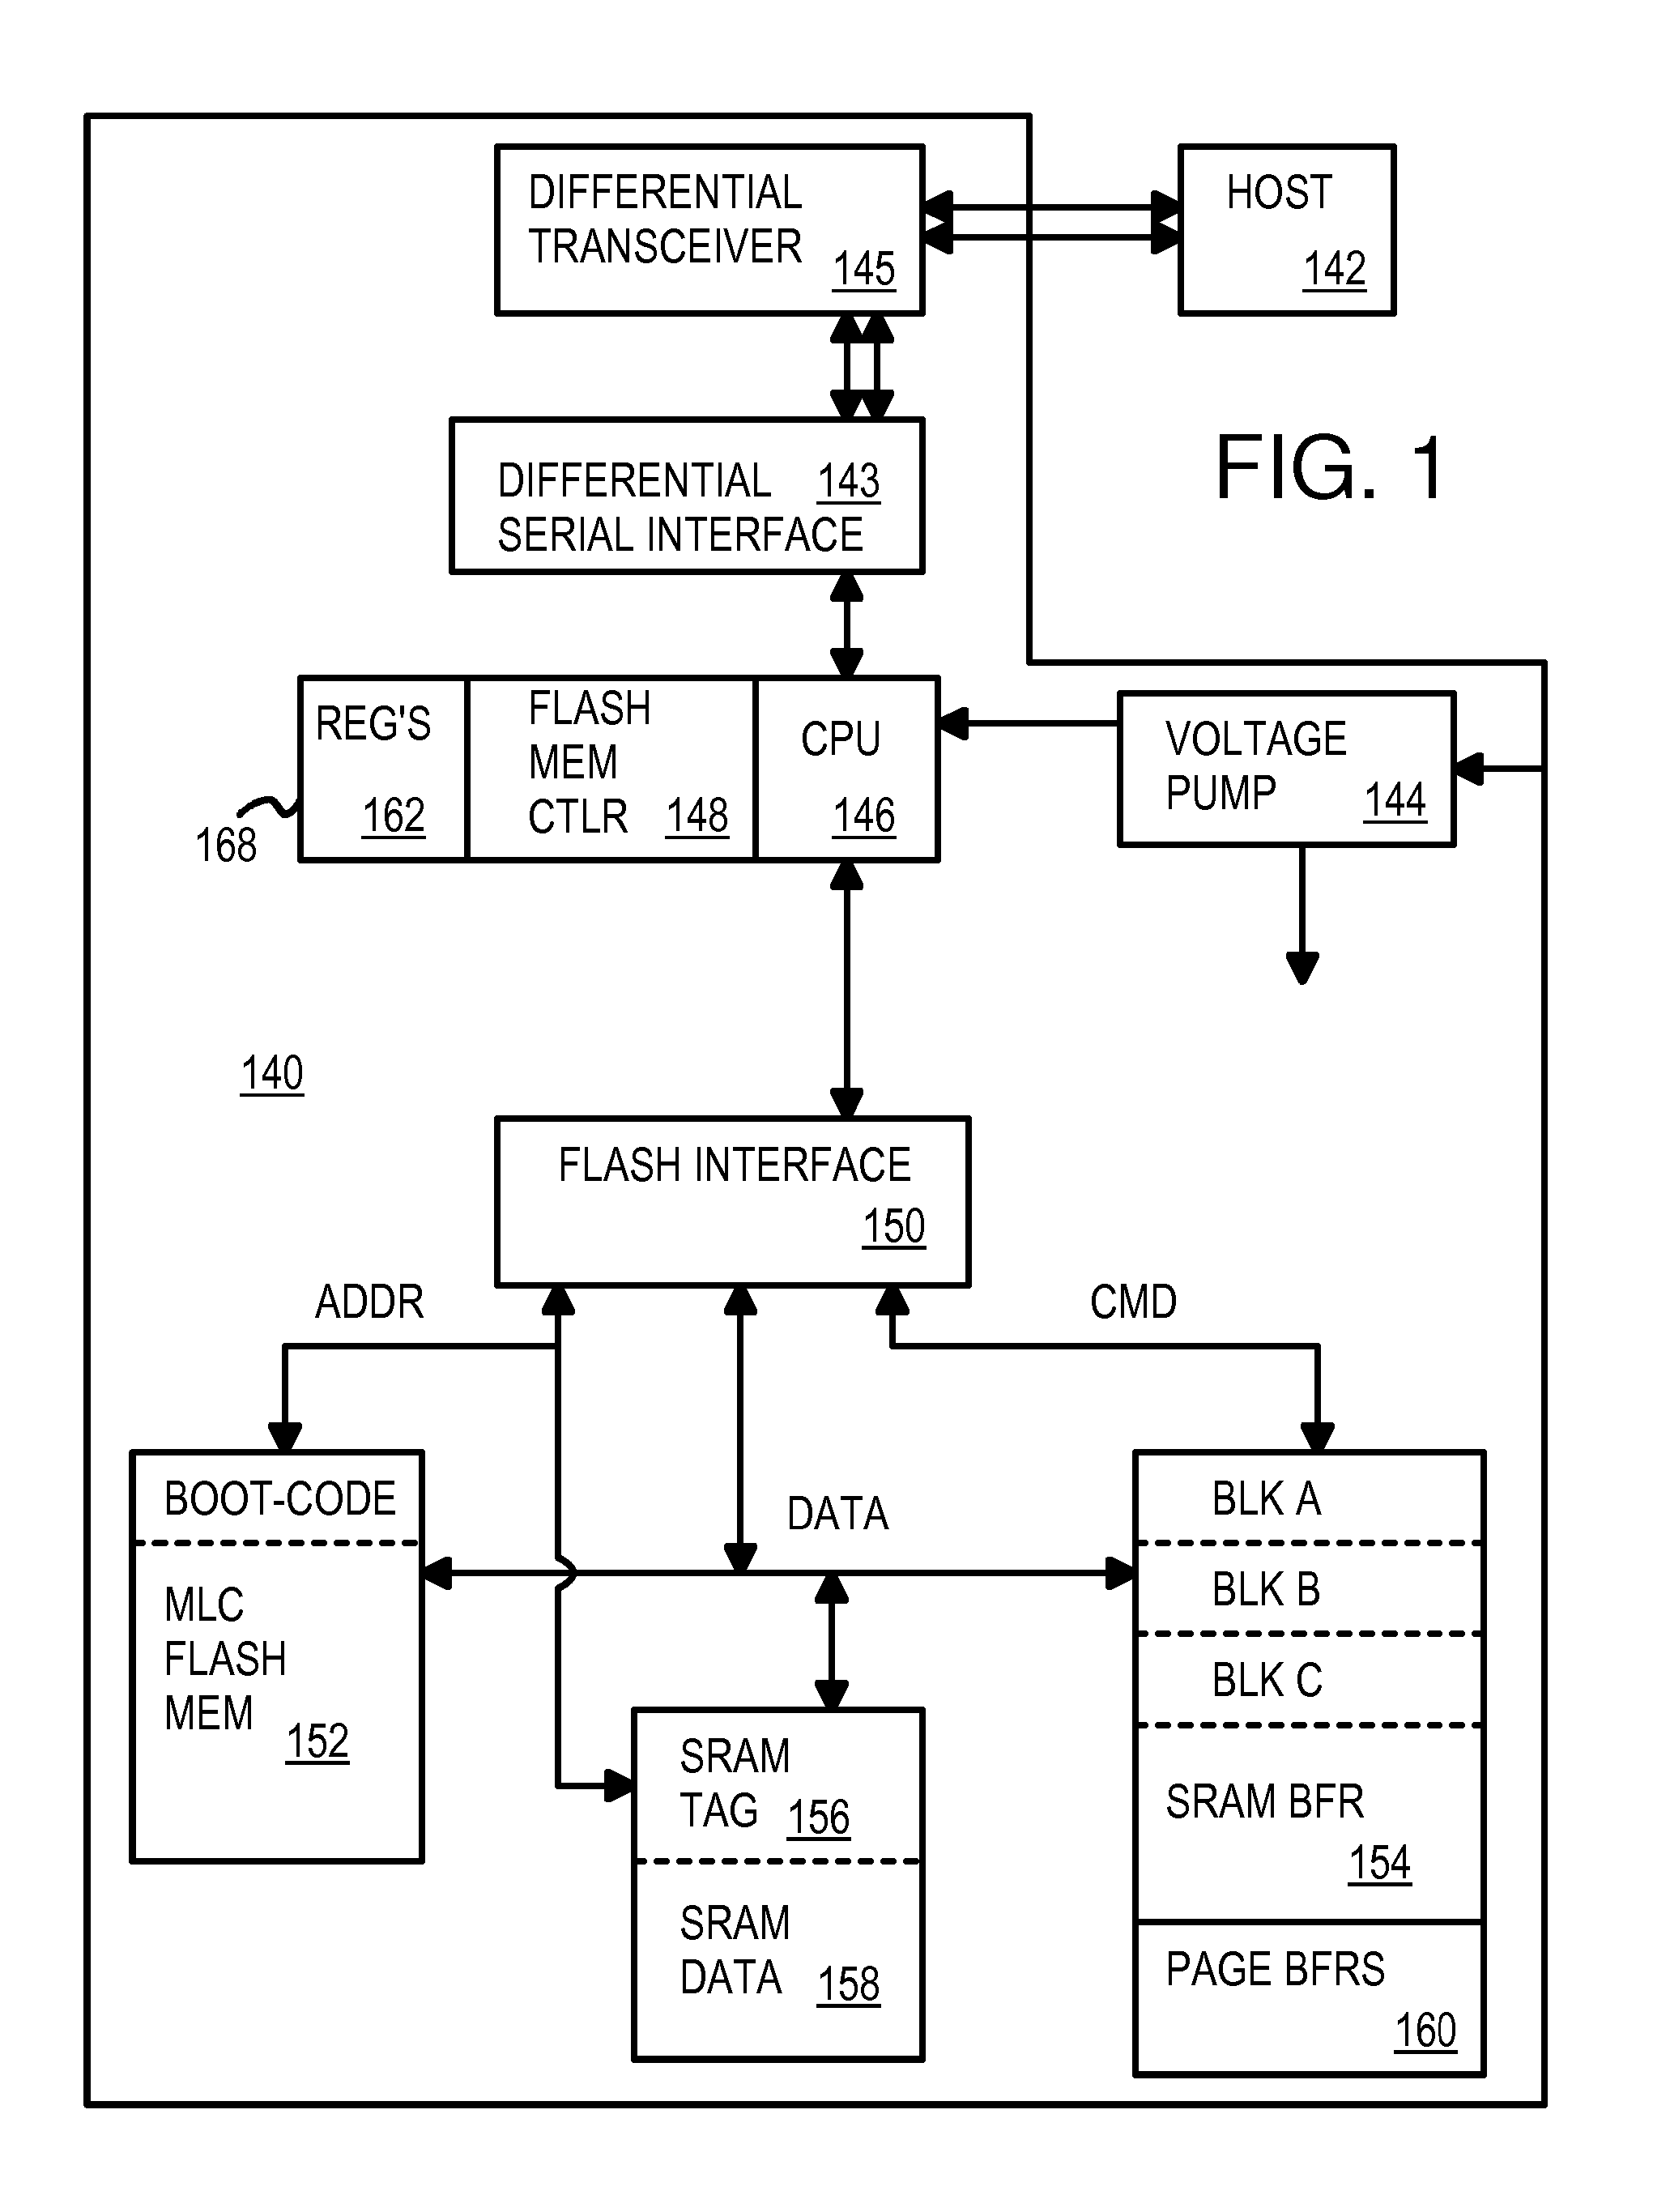 SRAM Cache & Flash Micro-Controller with Differential Packet Interface